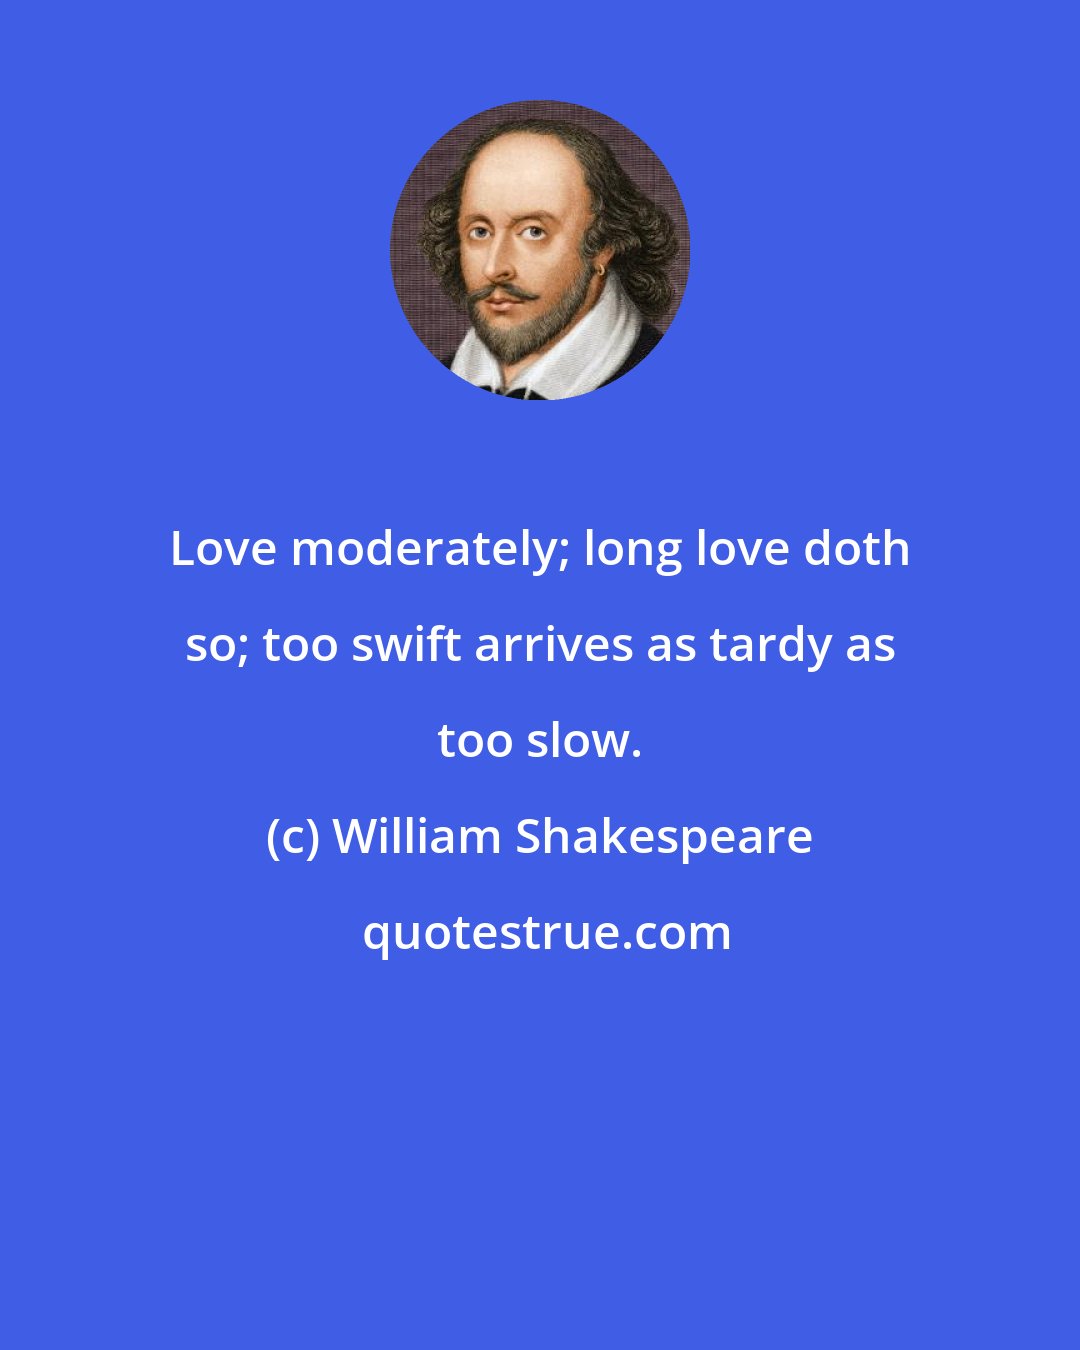 William Shakespeare: Love moderately; long love doth so; too swift arrives as tardy as too slow.